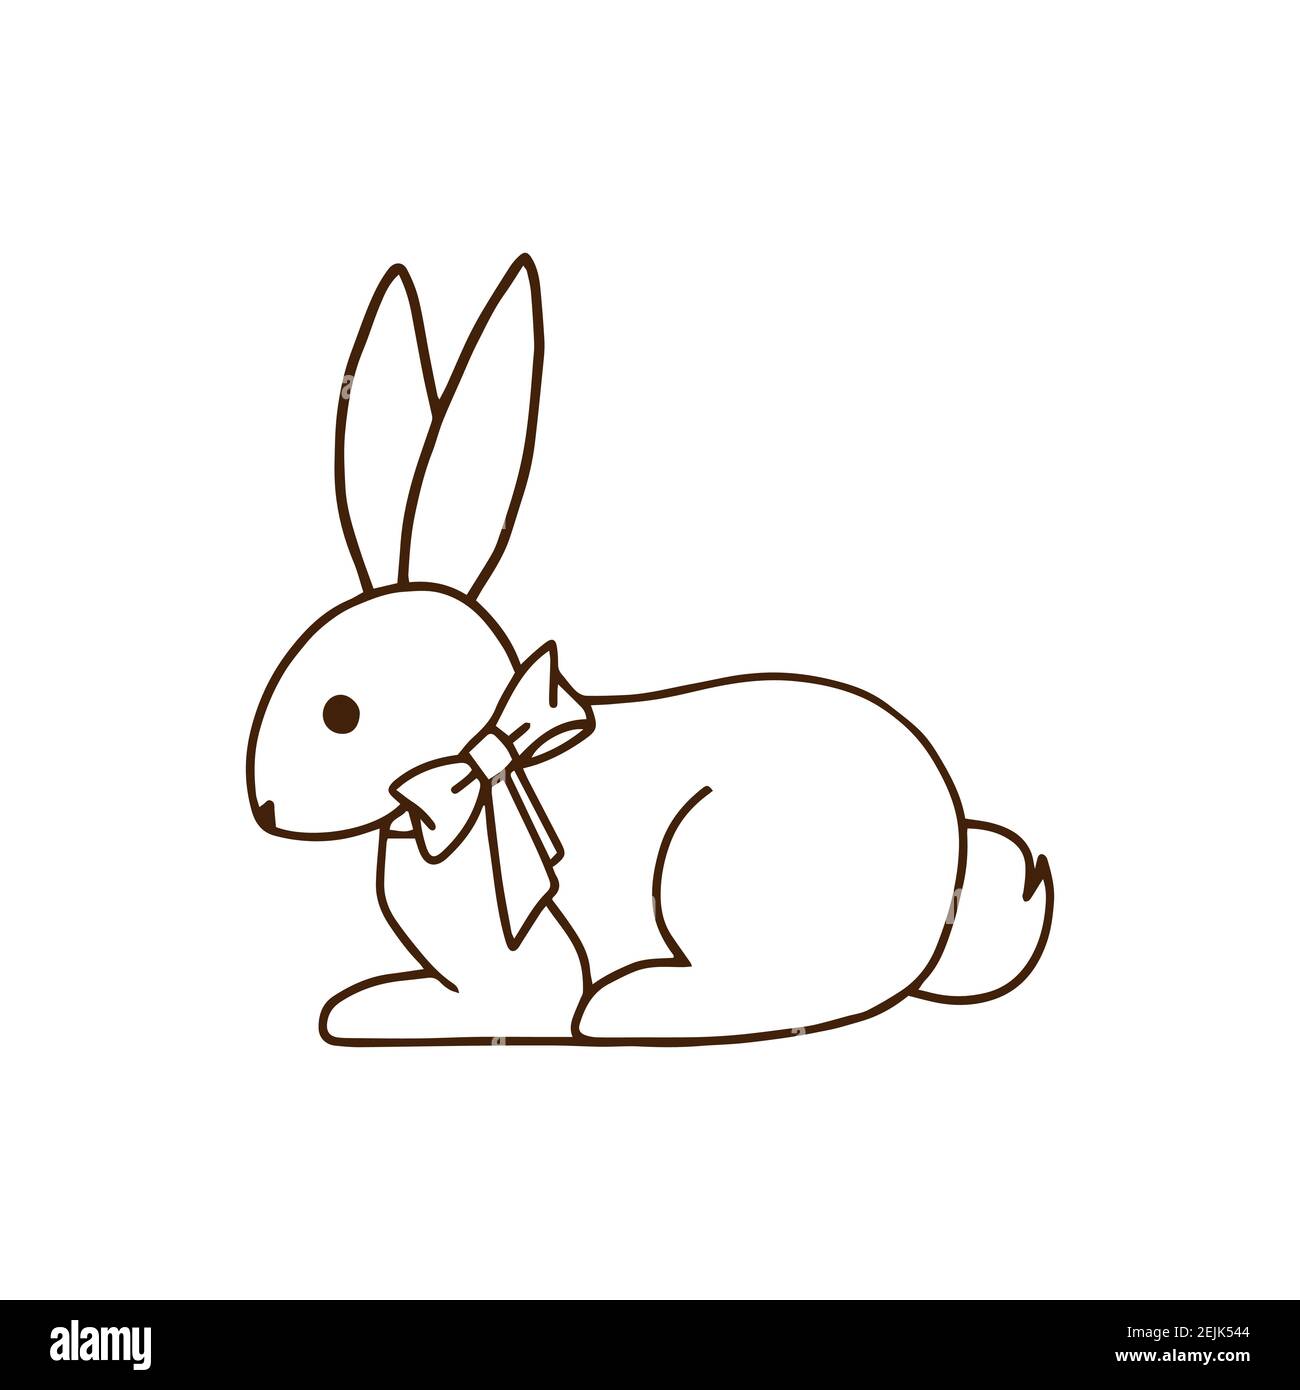 How to draw a Rabbit Easy Step by Step 🐇 Easy Bunny Rabbit Drawing  Tutorial - YouTube